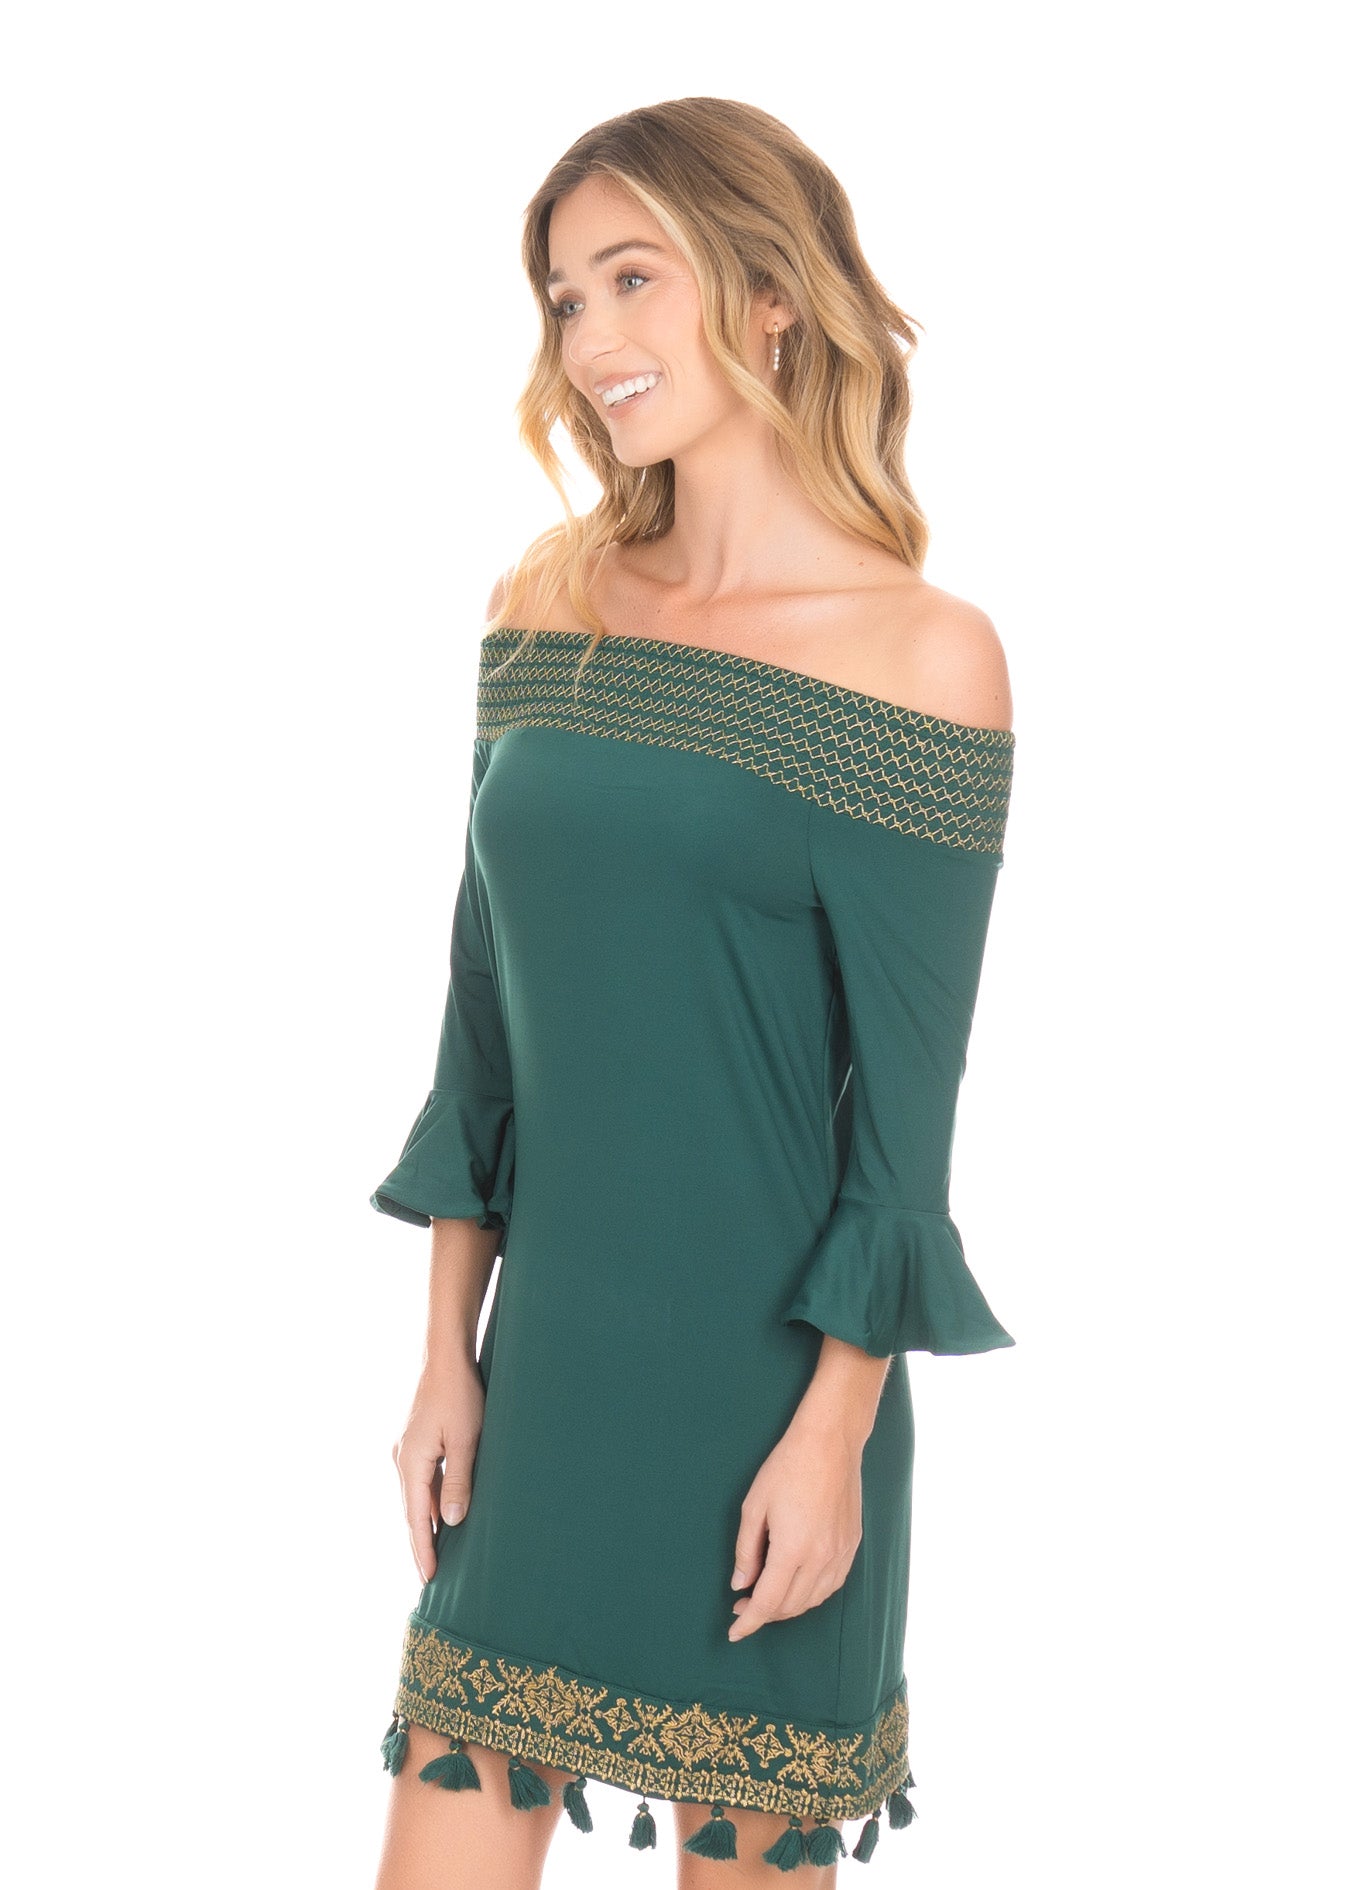 Side of blonde woman wearing the Emerald Metallic Embroidered Off The Shoulder Dress in front of white background.